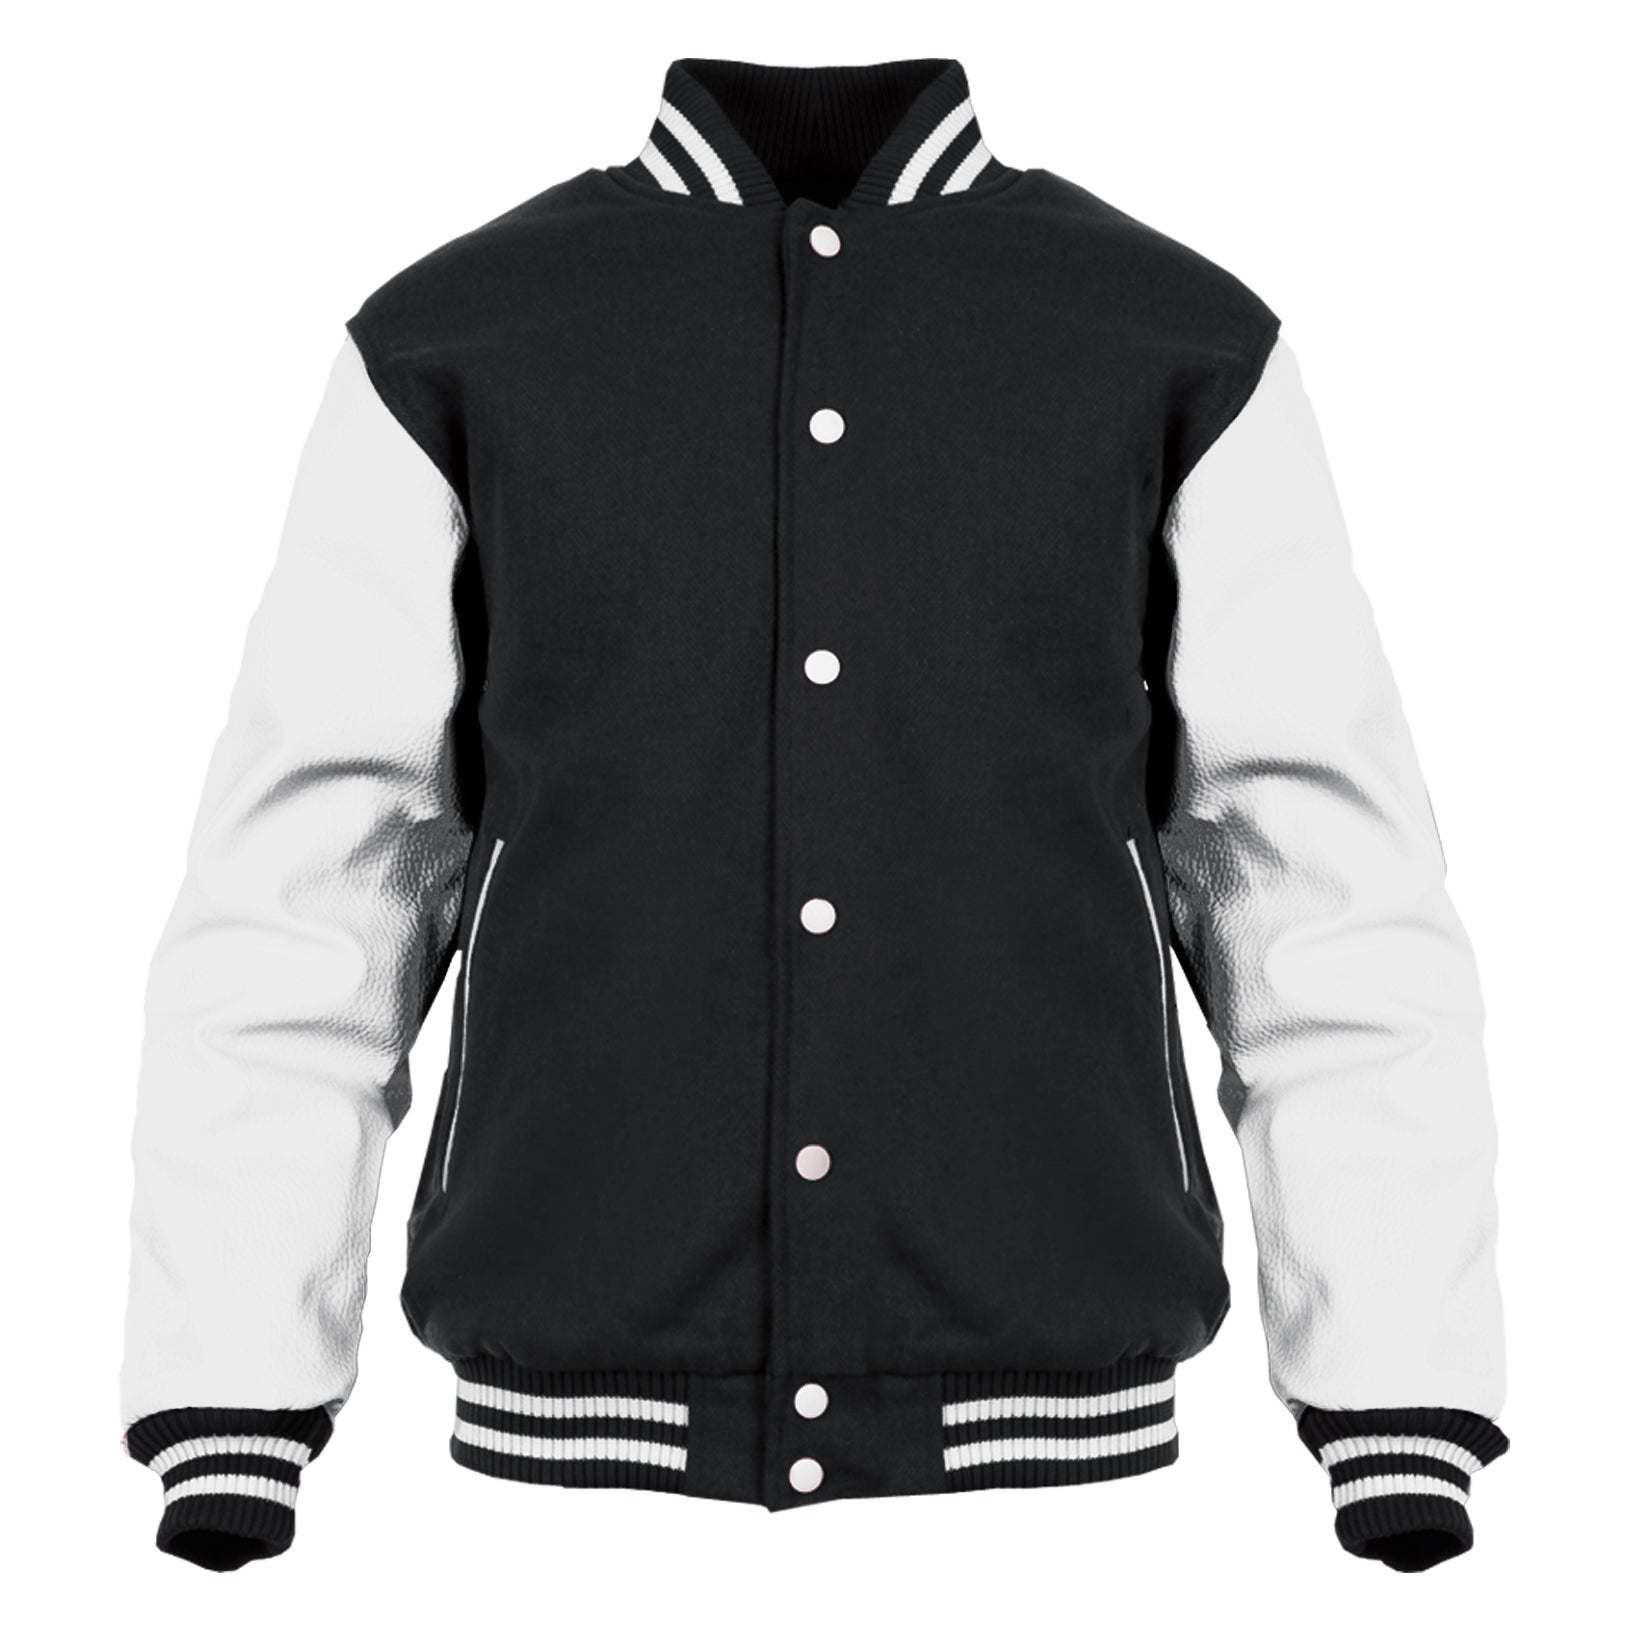 The Witcher Logo Blue Fire Ice Official Varsity Jacket